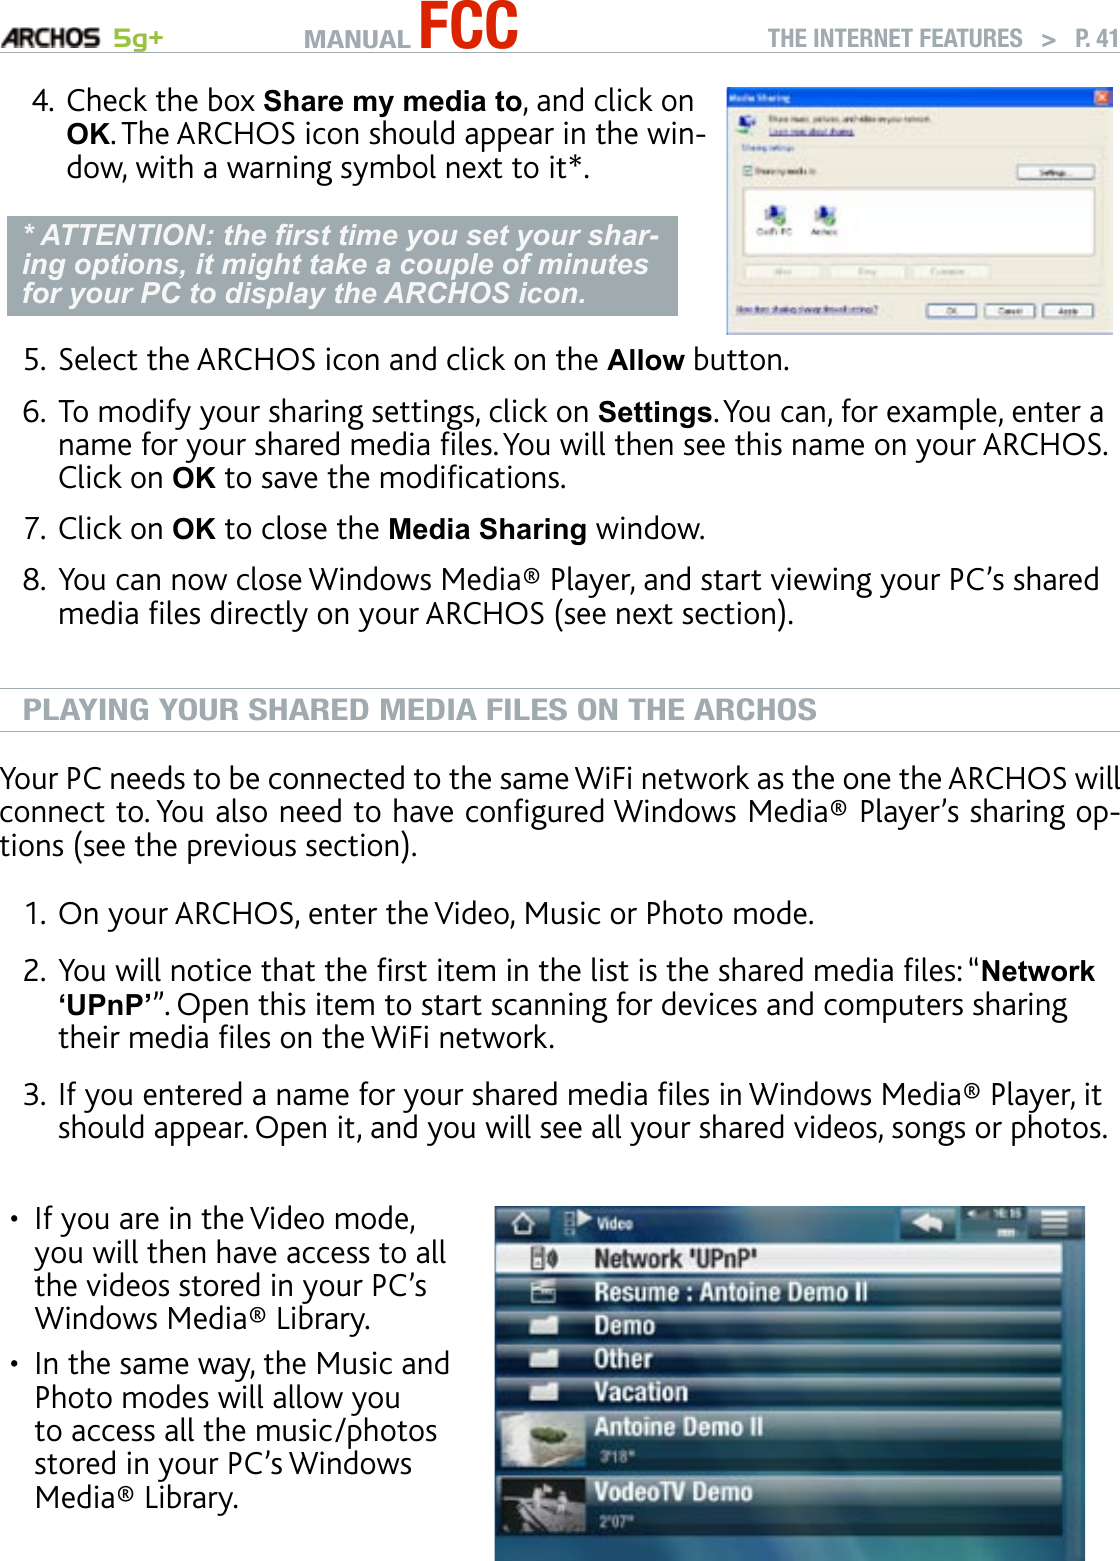 MANUAL FCC 5g+ THE INTERNET FEATURES   &gt;   P. 41Check the box Share my media to, and click on OK. The ARCHOS icon should appear in the win-dow, with a warning symbol next to it*. * ATTENTION: the rst time you set your shar-ing options, it might take a couple of minutes for your PC to display the ARCHOS icon.4.Select the ARCHOS icon and click on the Allow button.To modify your sharing settings, click on Settings. You can, for example, enter a name for your shared media les. You will then see this name on your ARCHOS. Click on OK to save the modications.Click on OK to close the Media Sharing window. You can now close Windows Media® Player, and start viewing your PC’s shared media les directly on your ARCHOS (see next section).PLAYING YOUR SHARED MEDIA FILES ON THE ARCHOSYour PC needs to be connected to the same WiFi network as the one the ARCHOS will connect to. You also need to have congured Windows Media® Player’s sharing op-tions (see the previous section). On your ARCHOS, enter the Video, Music or Photo mode. You will notice that the rst item in the list is the shared media les: “Network ‘UPnP’”. Open this item to start scanning for devices and computers sharing their media les on the WiFi network. If you entered a name for your shared media les in Windows Media® Player, it should appear. Open it, and you will see all your shared videos, songs or photos.If you are in the Video mode, you will then have access to all the videos stored in your PC’s Windows Media® Library. In the same way, the Music and Photo modes will allow you to access all the music/photos stored in your PC’s Windows Media® Library.••5.6.7.8.1.2.3.